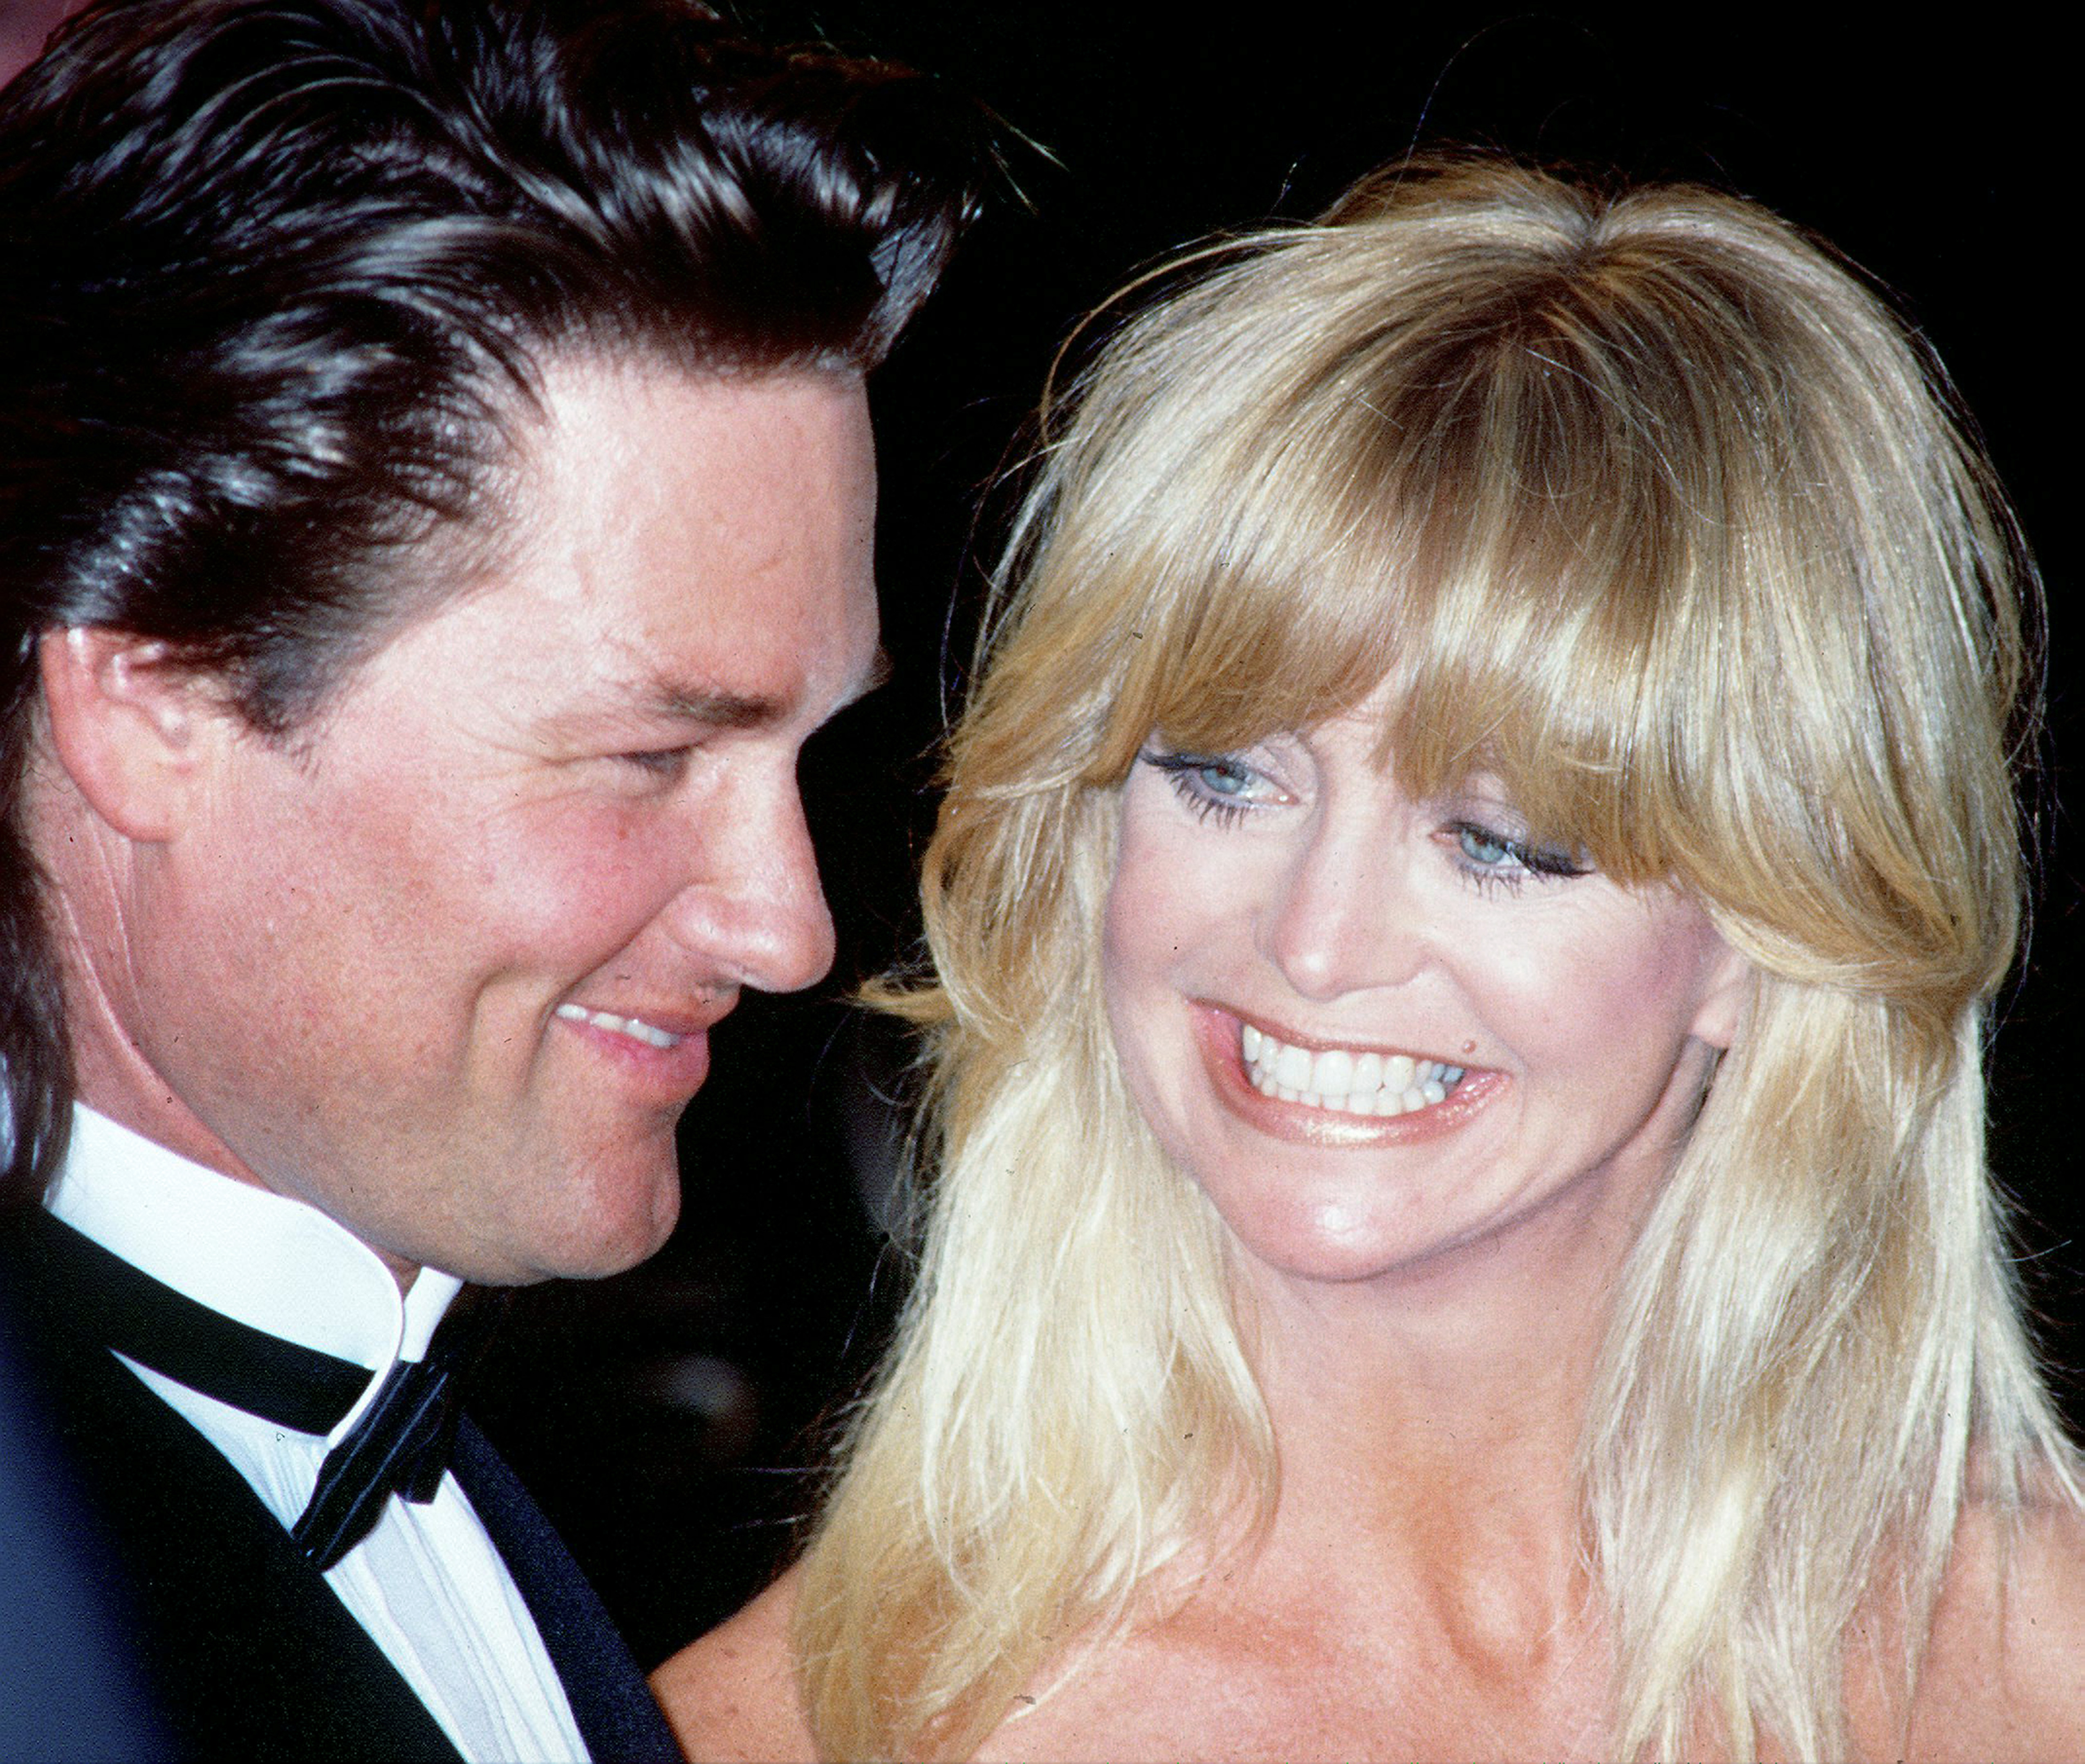 Kurt Russell and Goldie Hawn on January 1, 1991 | Source: Getty Images